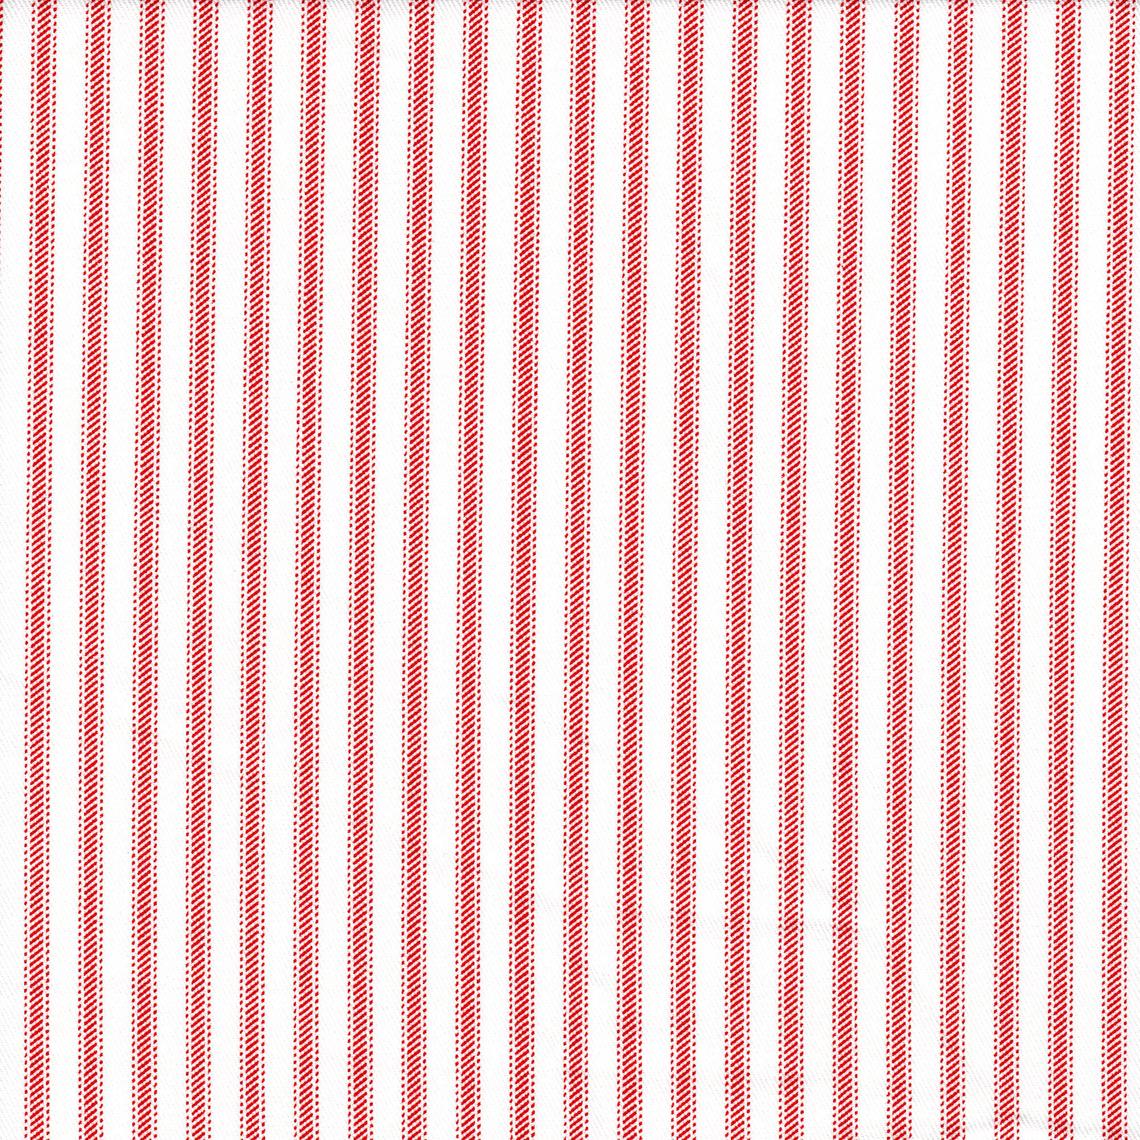 rod pocket curtain panels pair in classic lipstick red ticking stripe on white